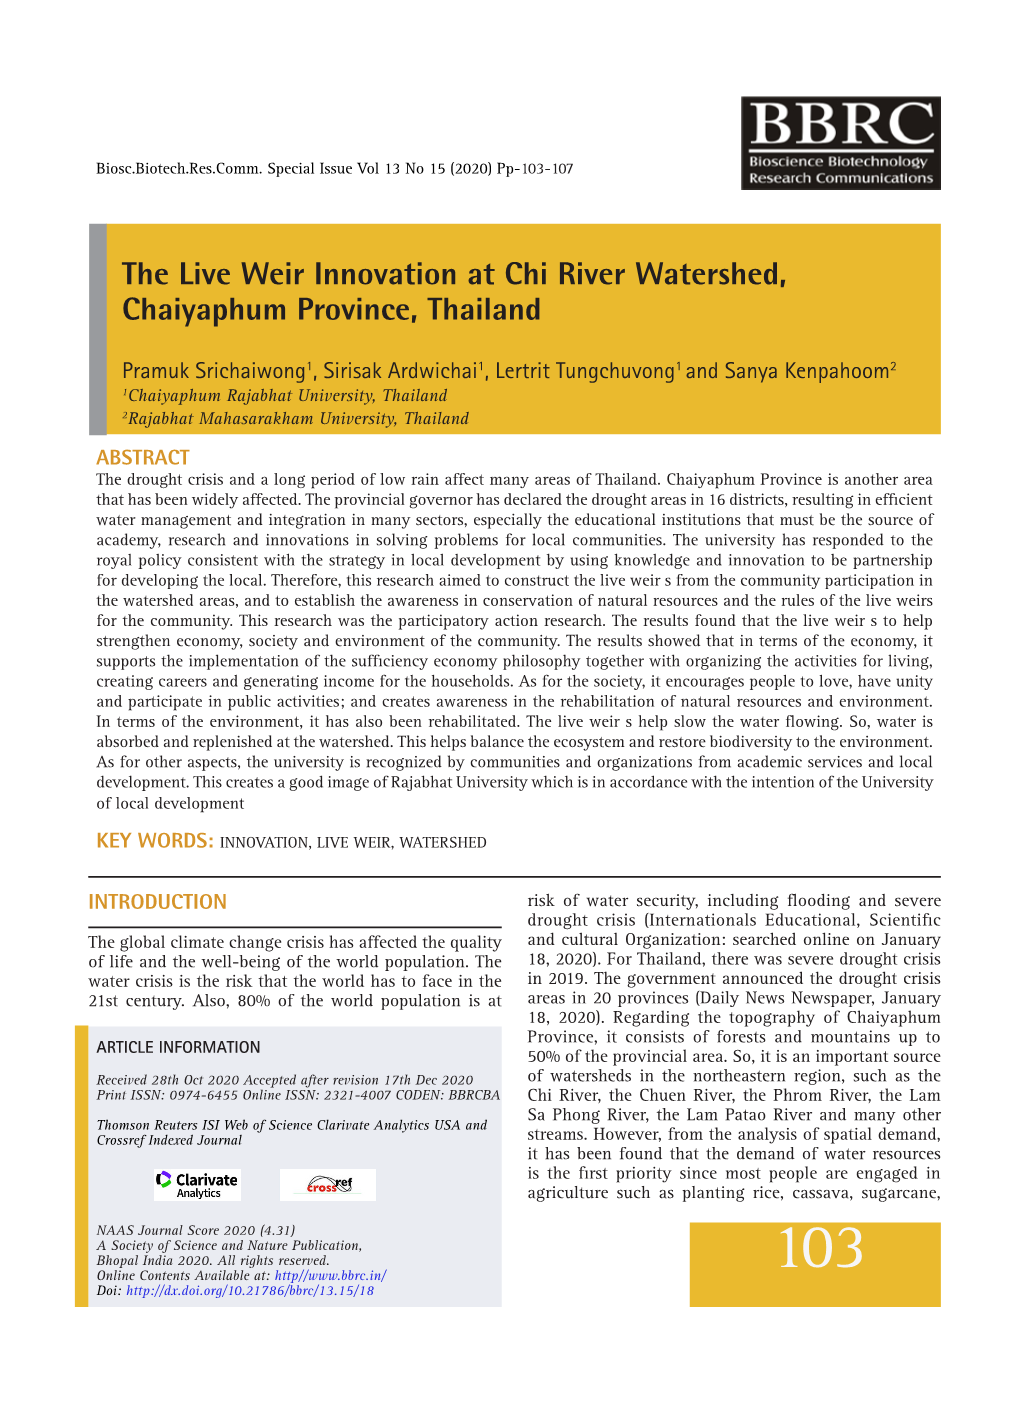 The Live Weir Innovation at Chi River Watershed, Chaiyaphum Province, Thailand